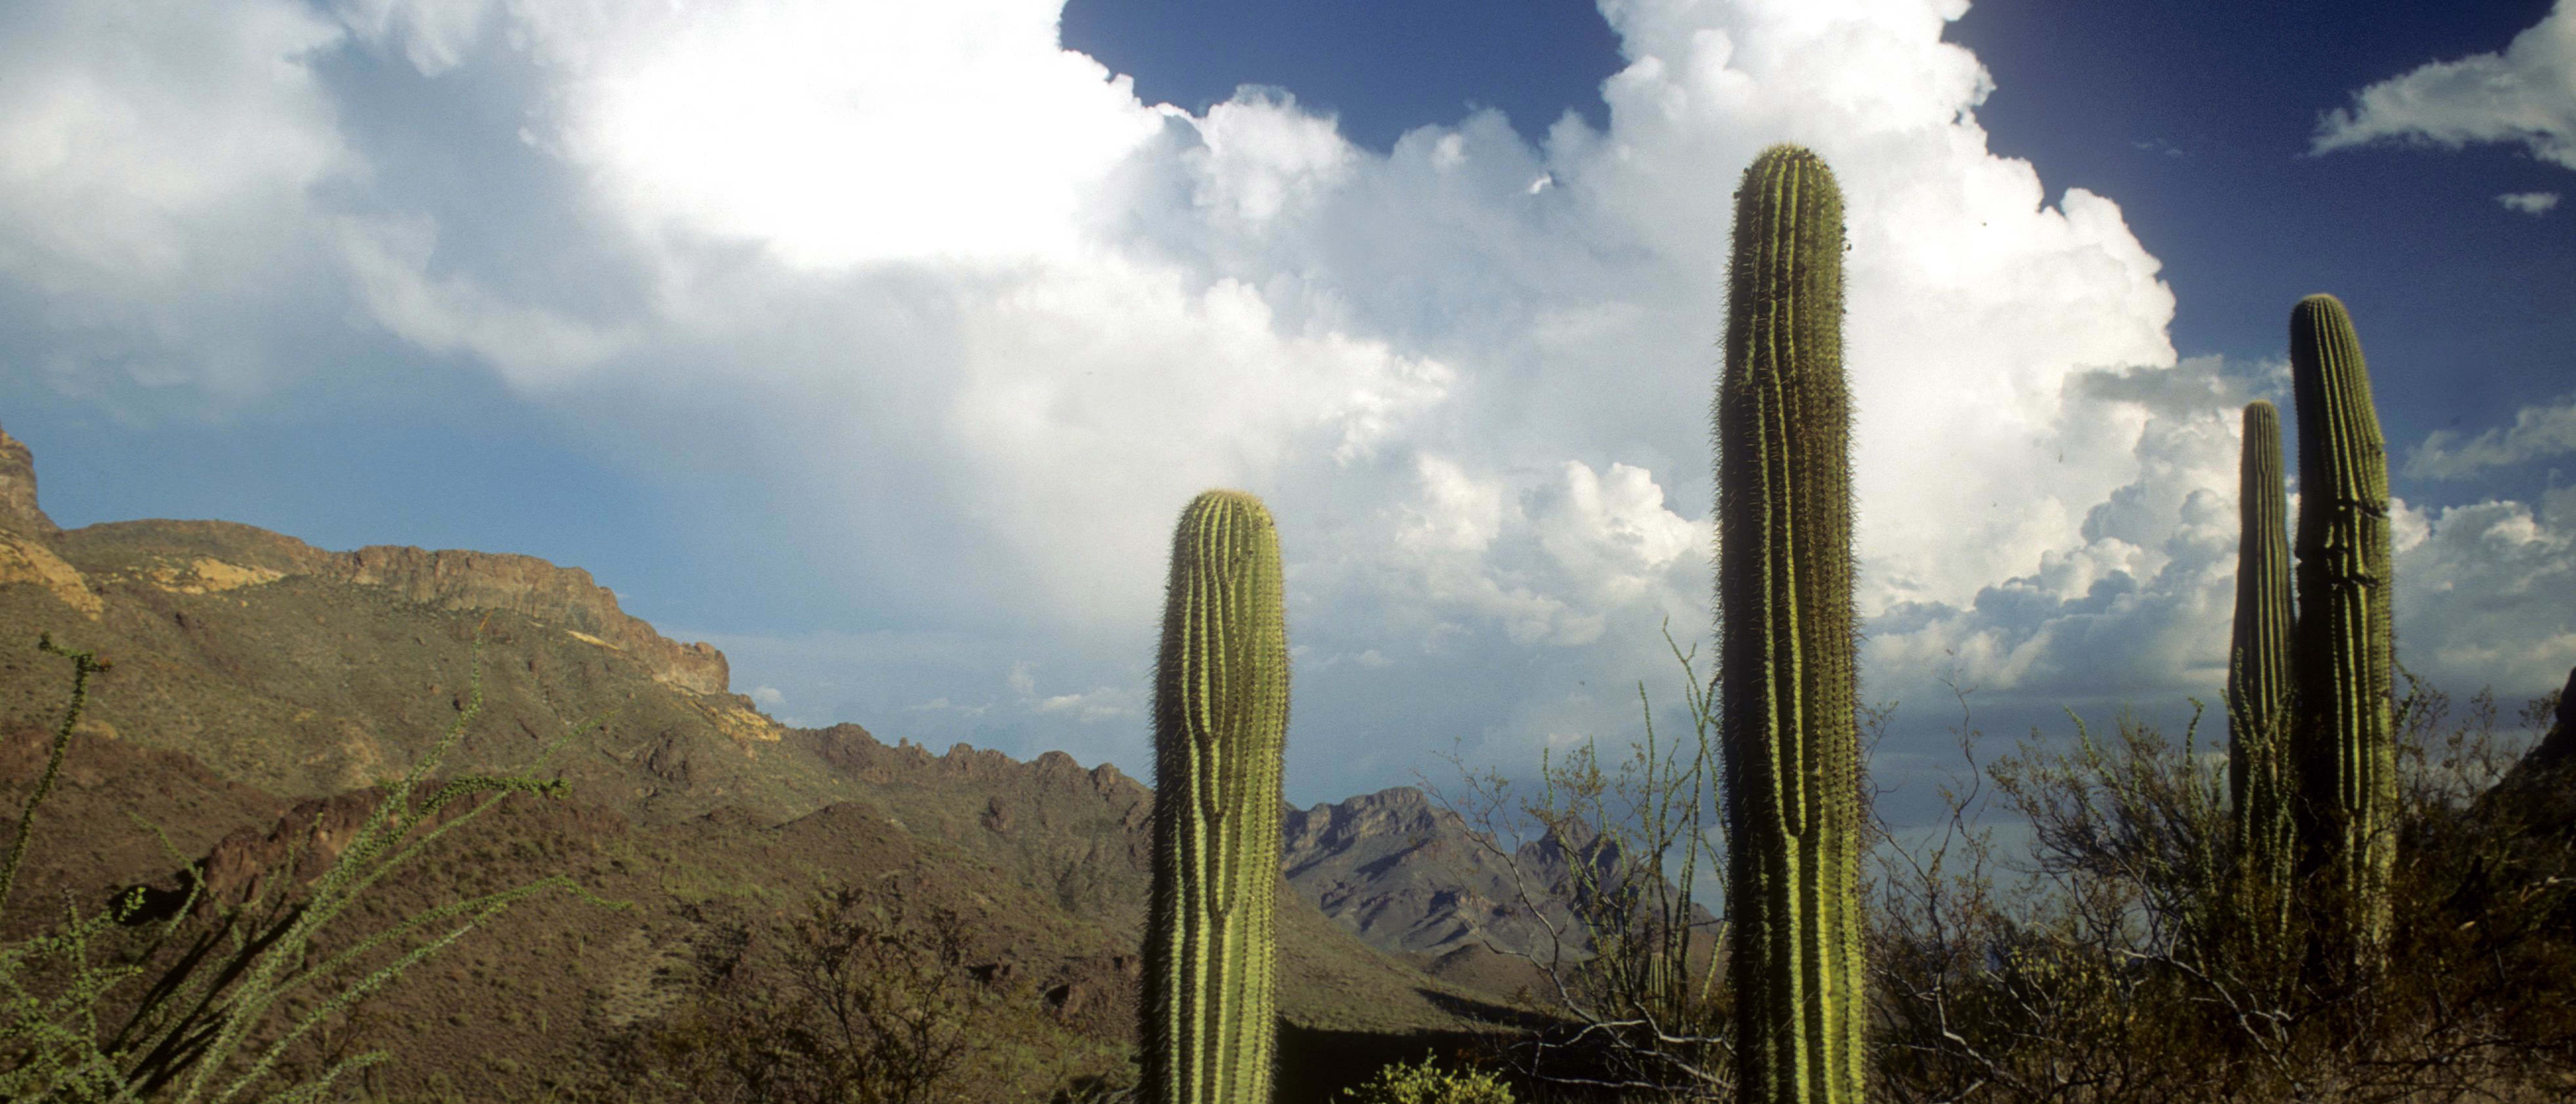 Monsoon clouds over desert mountains and saguaro cacti.